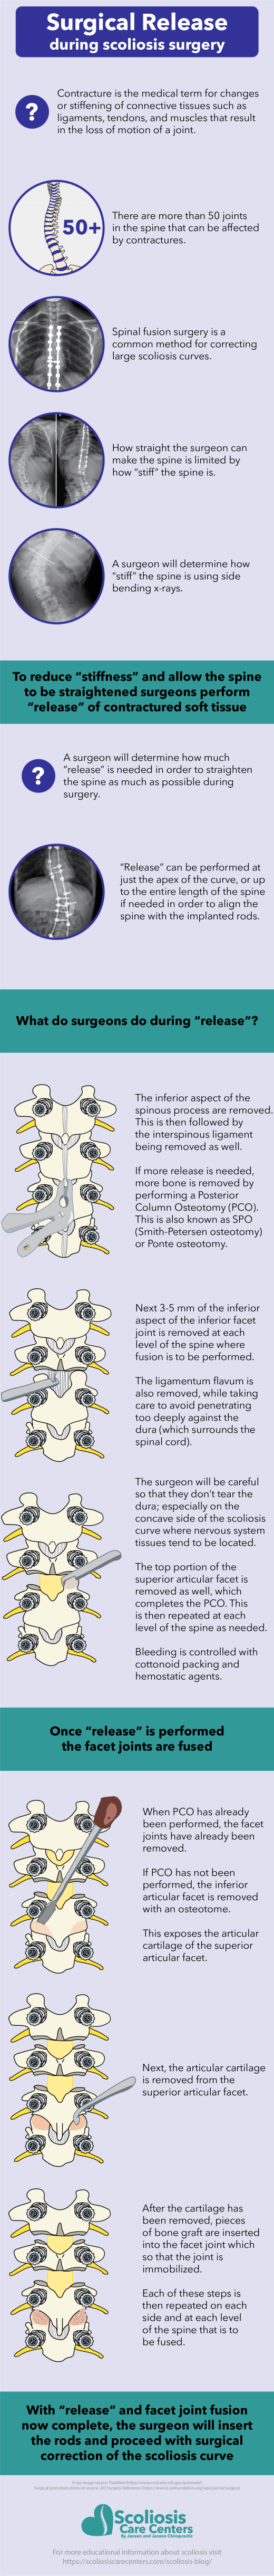 surgical-release-of-contractured-soft-tissue-and-facet-joint-fusion-spinal-fusion-surgery